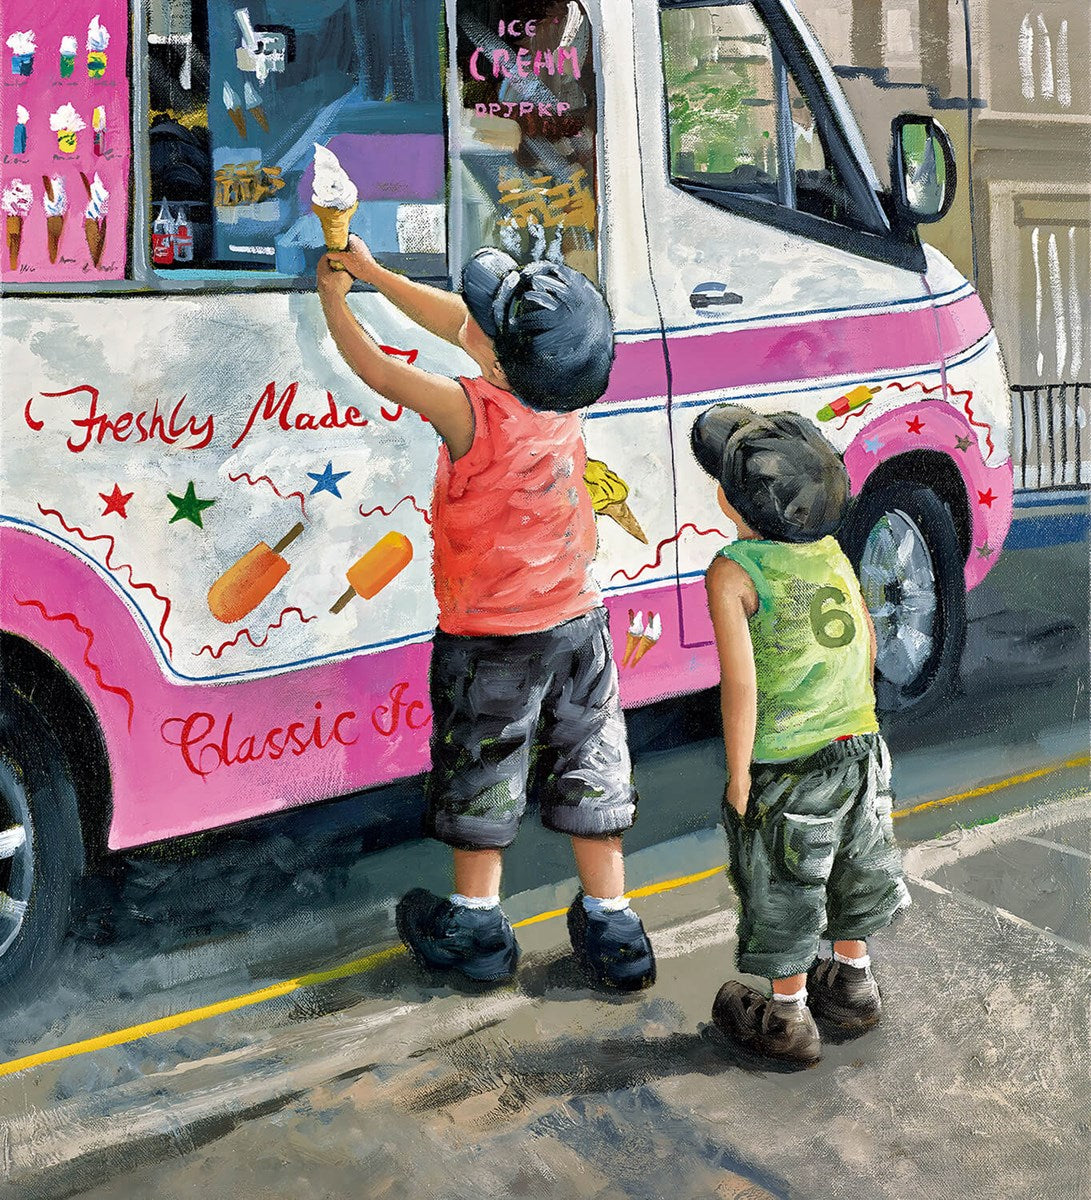 Sweet Memories limited edition print by Keith Proctor